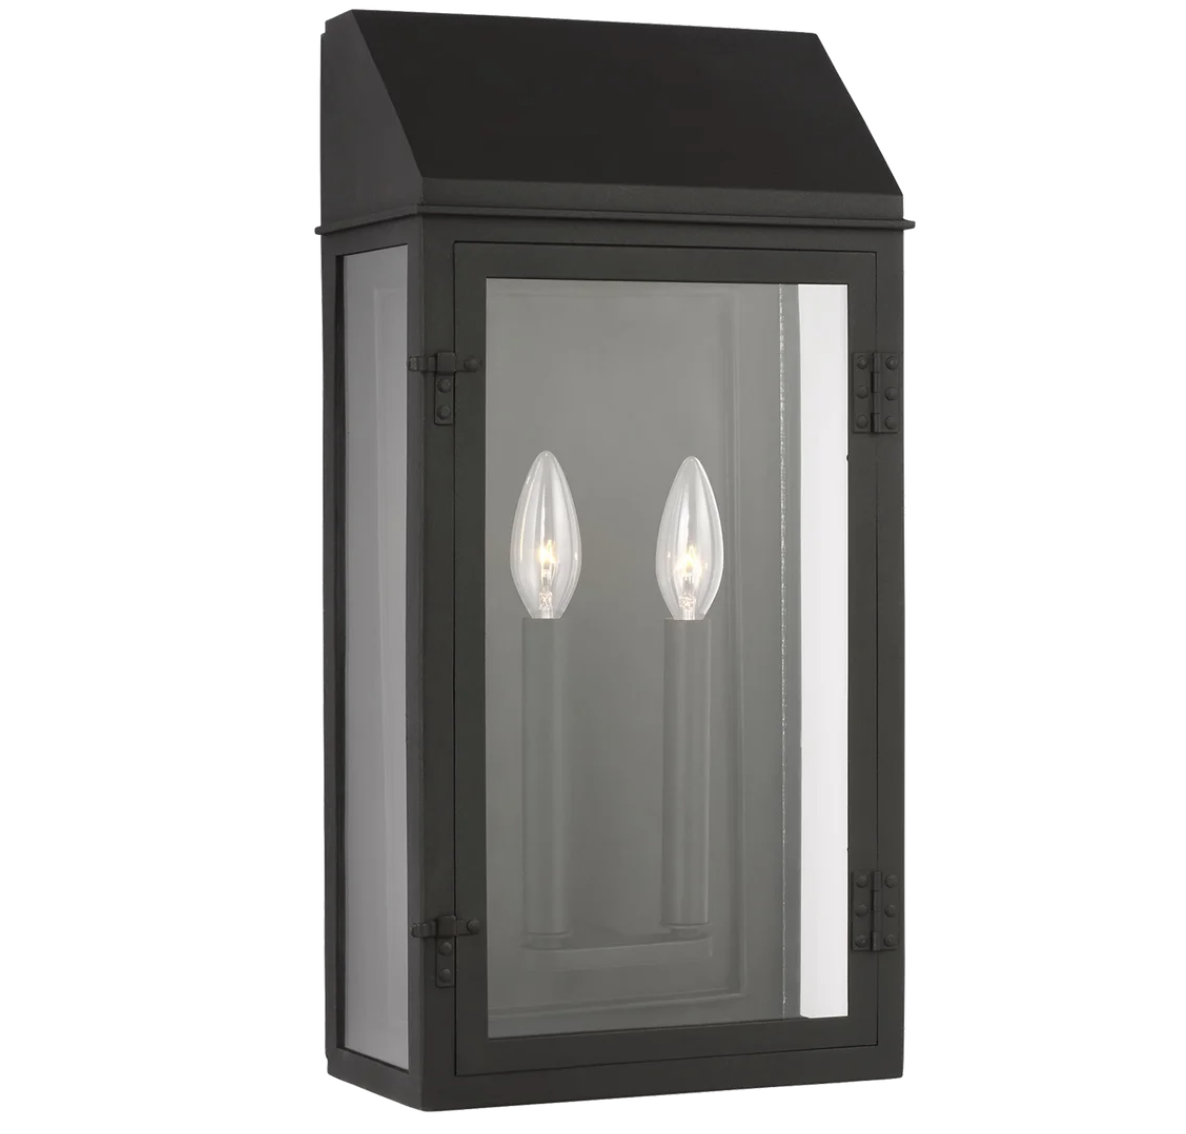 Create a Welcoming Atmosphere with the Hingham Large Outdoor Lantern